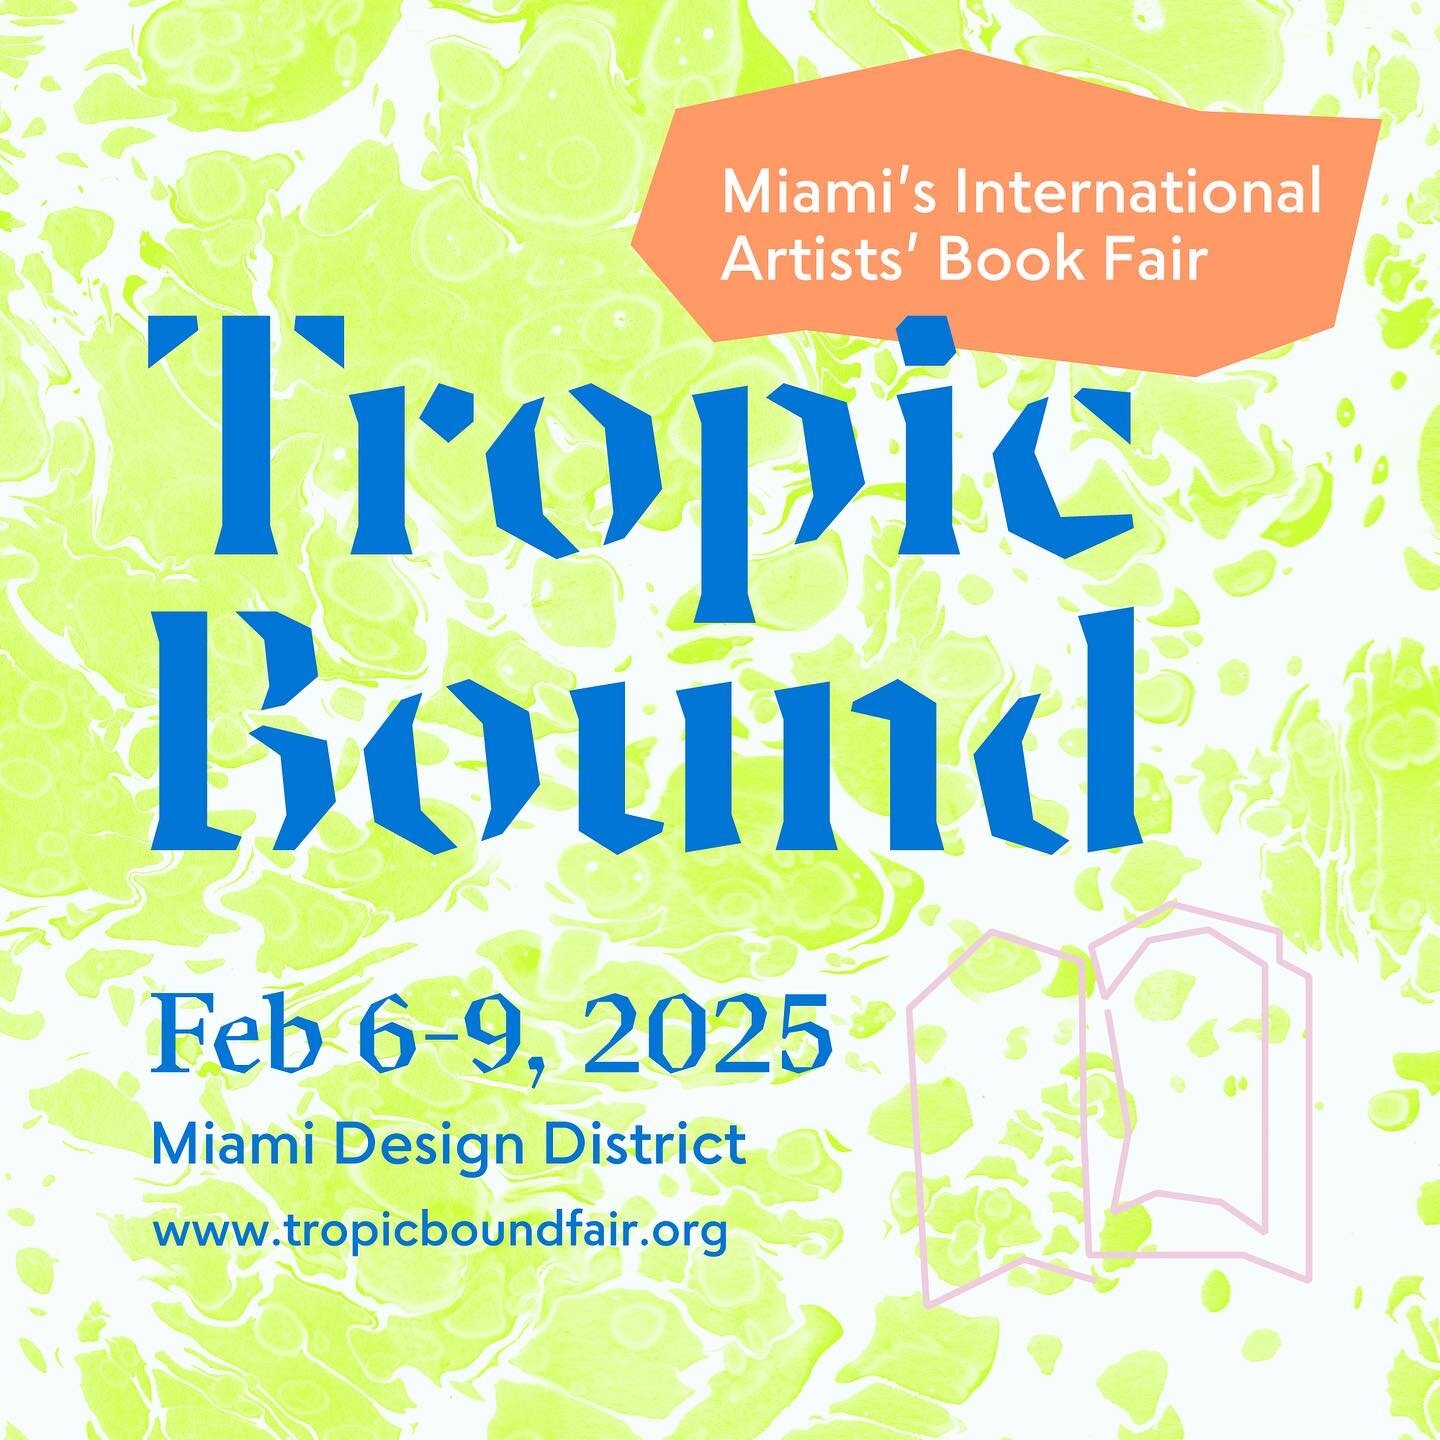 Tropic Bound returns! Feb 6-9, 2025
Miami&rsquo;s international, biennial Artists&rsquo; Book Fair returns to the Miami Design District February 6-9, 2025! Book artists, publishers, curators, librarians, book lovers and the aesthetically curious will